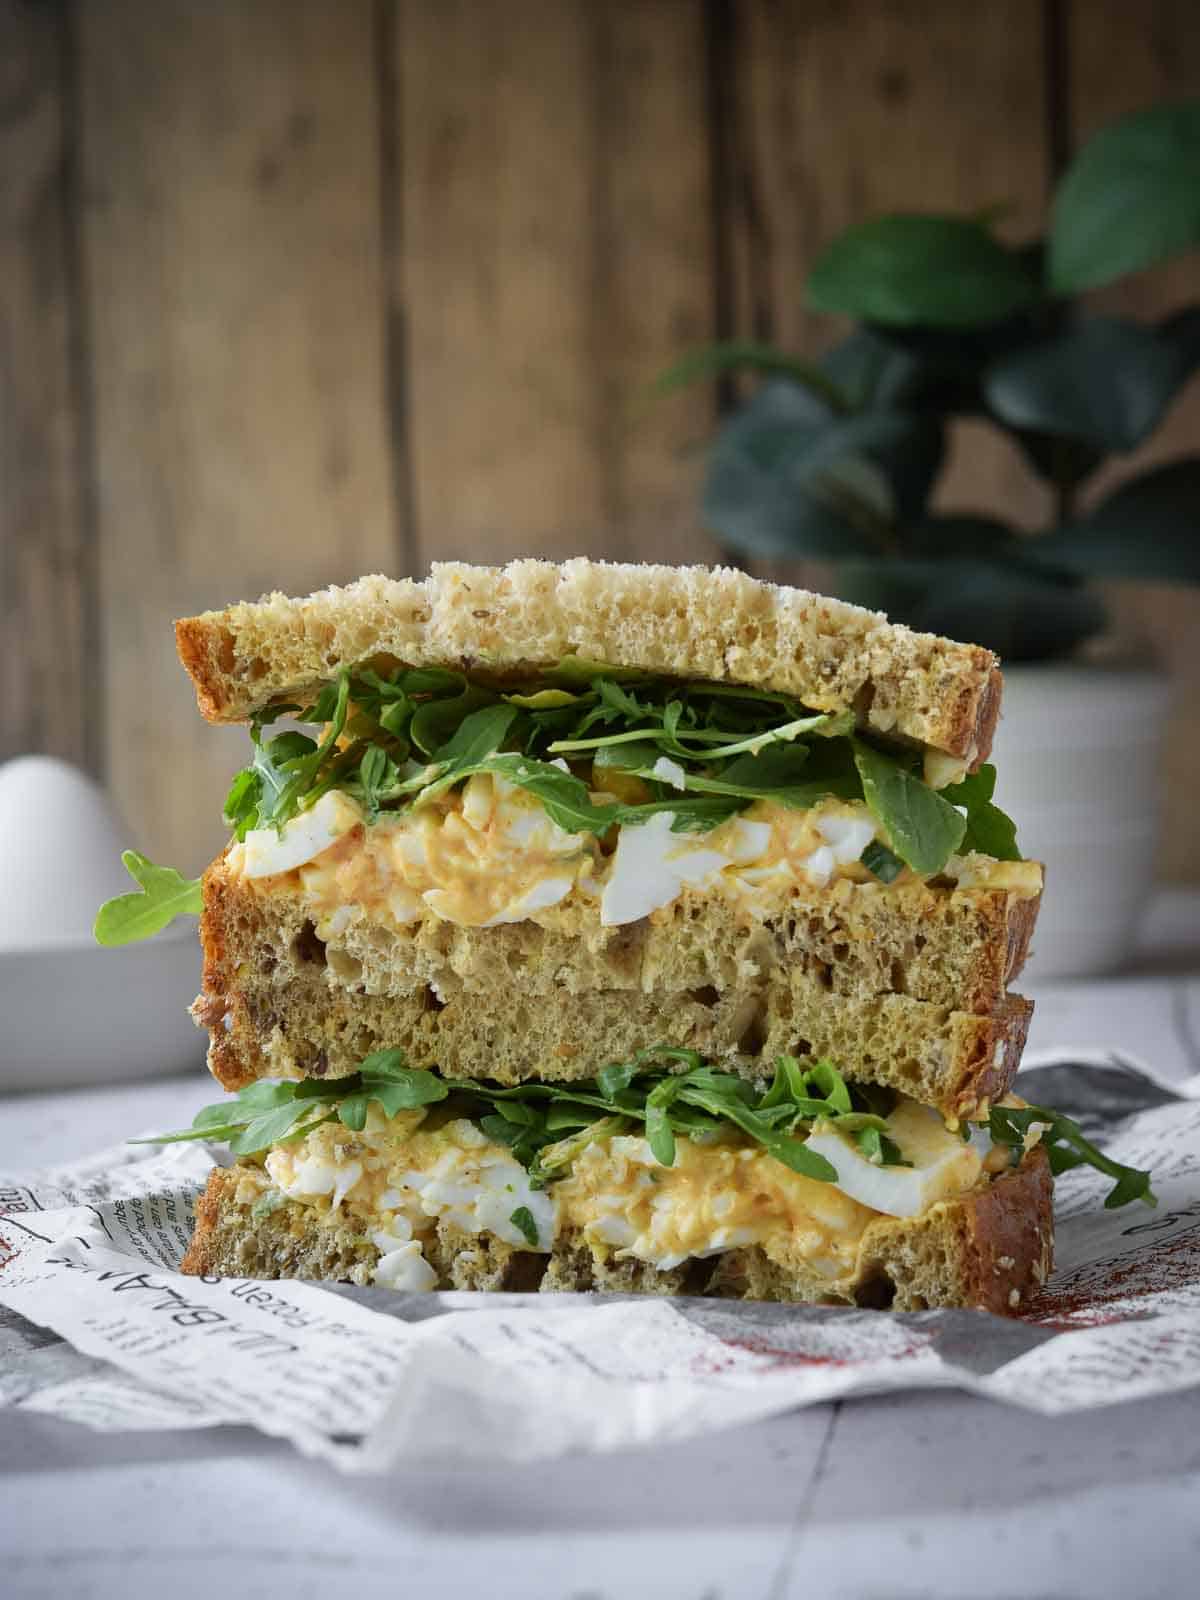 Egg salad sandwich stacked on deli paper with a wood background.